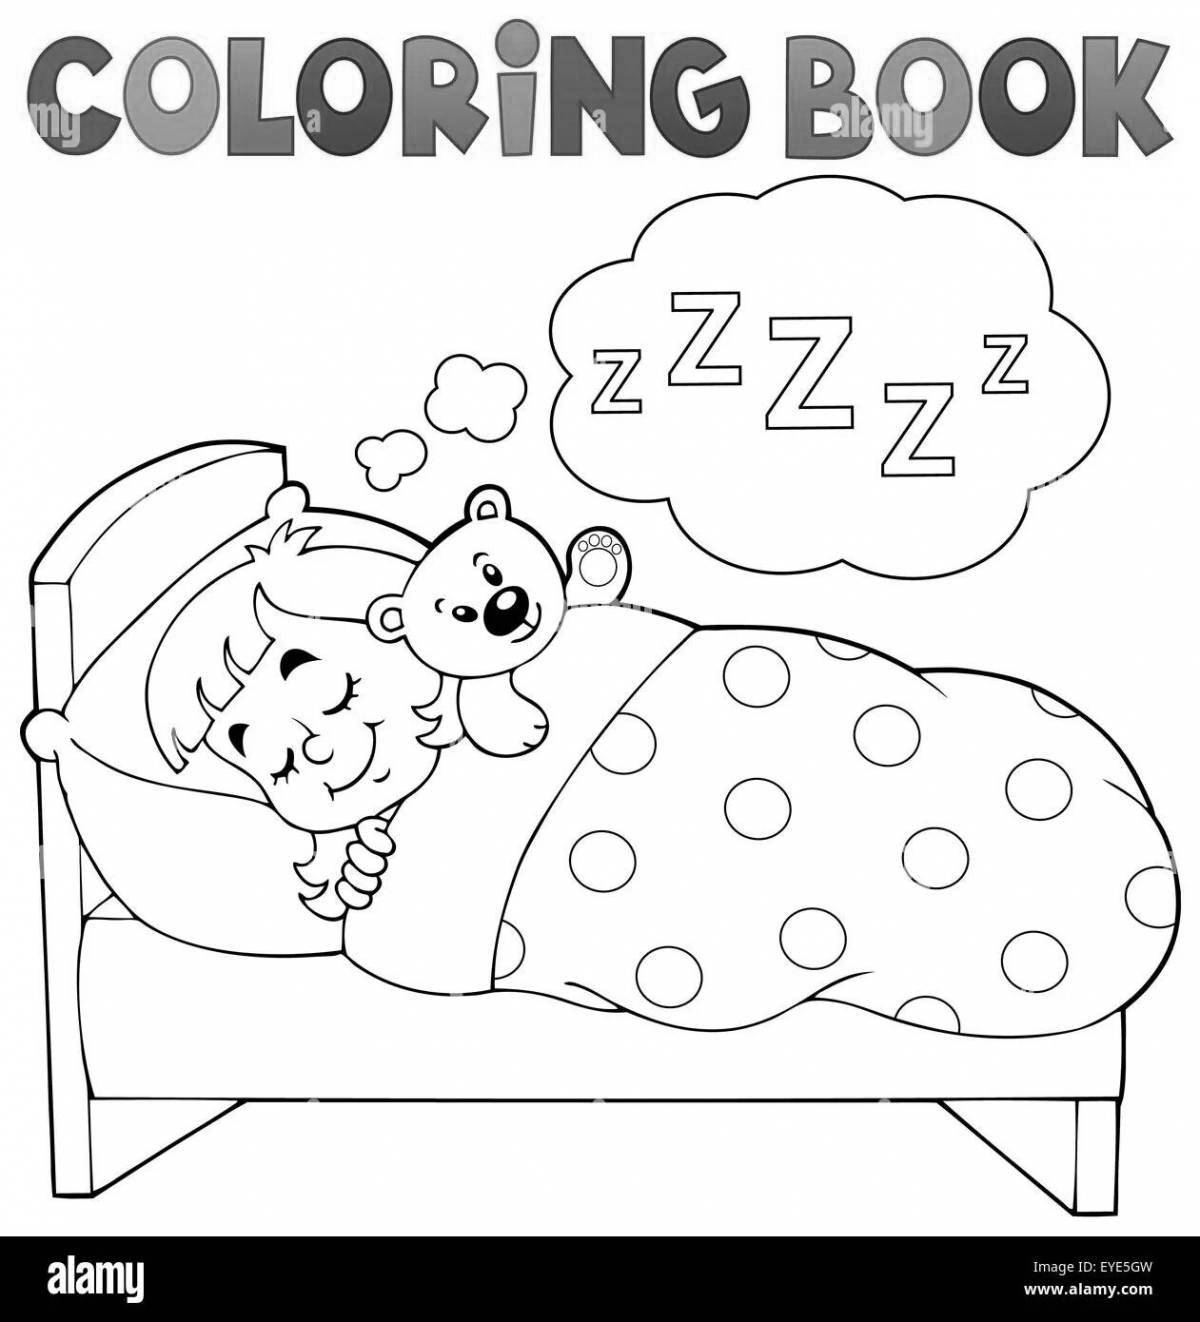 Cute sleeping baby coloring page